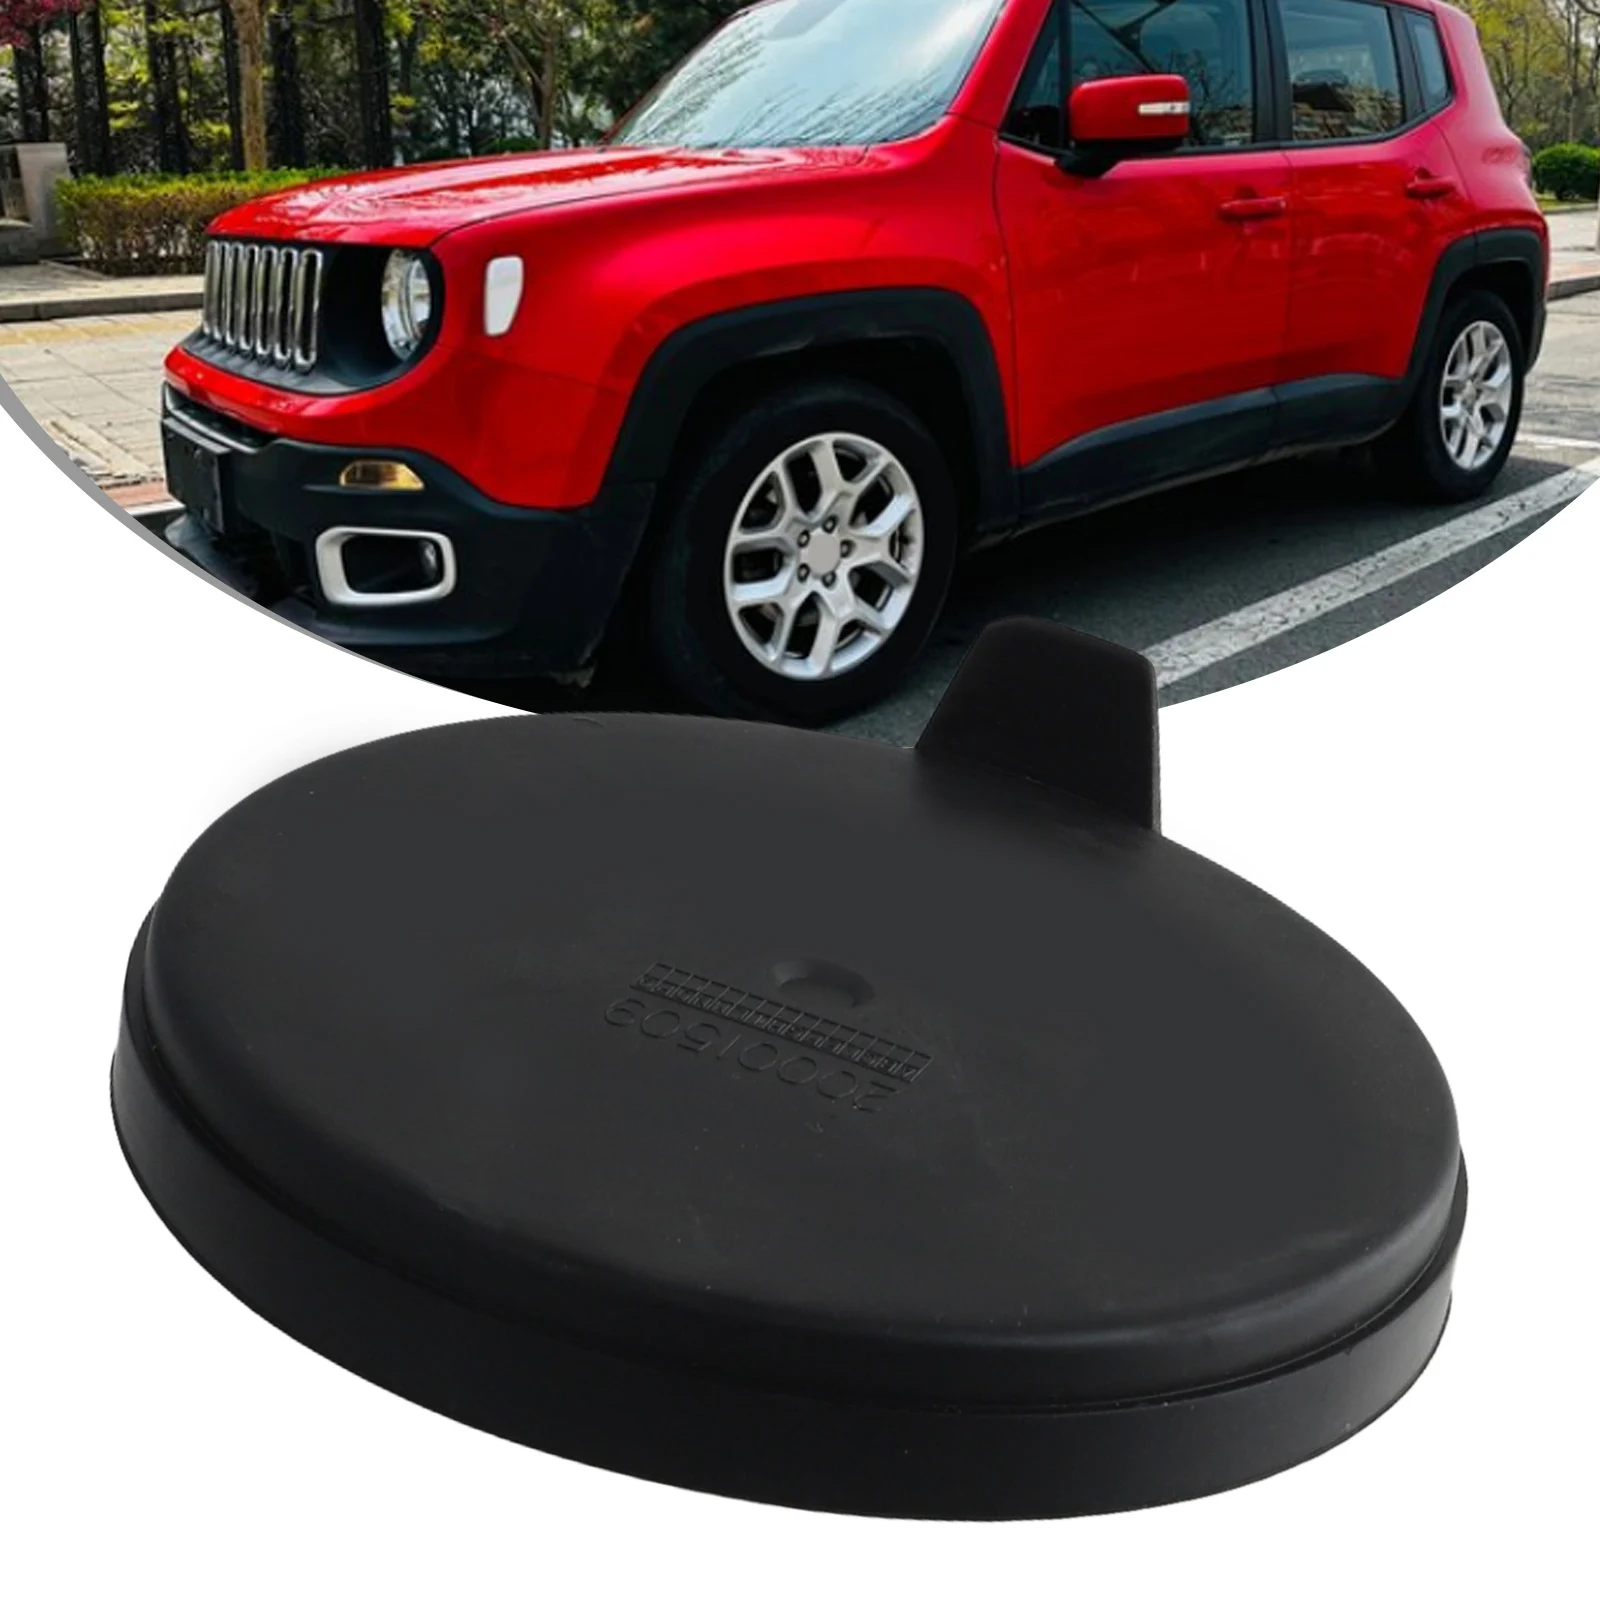 1PCS Car Headlight Dust Cover For Jeep For Renegade For Version 2016 Headlight Bulb Cover Lid Dust Cap Part Number 20001509